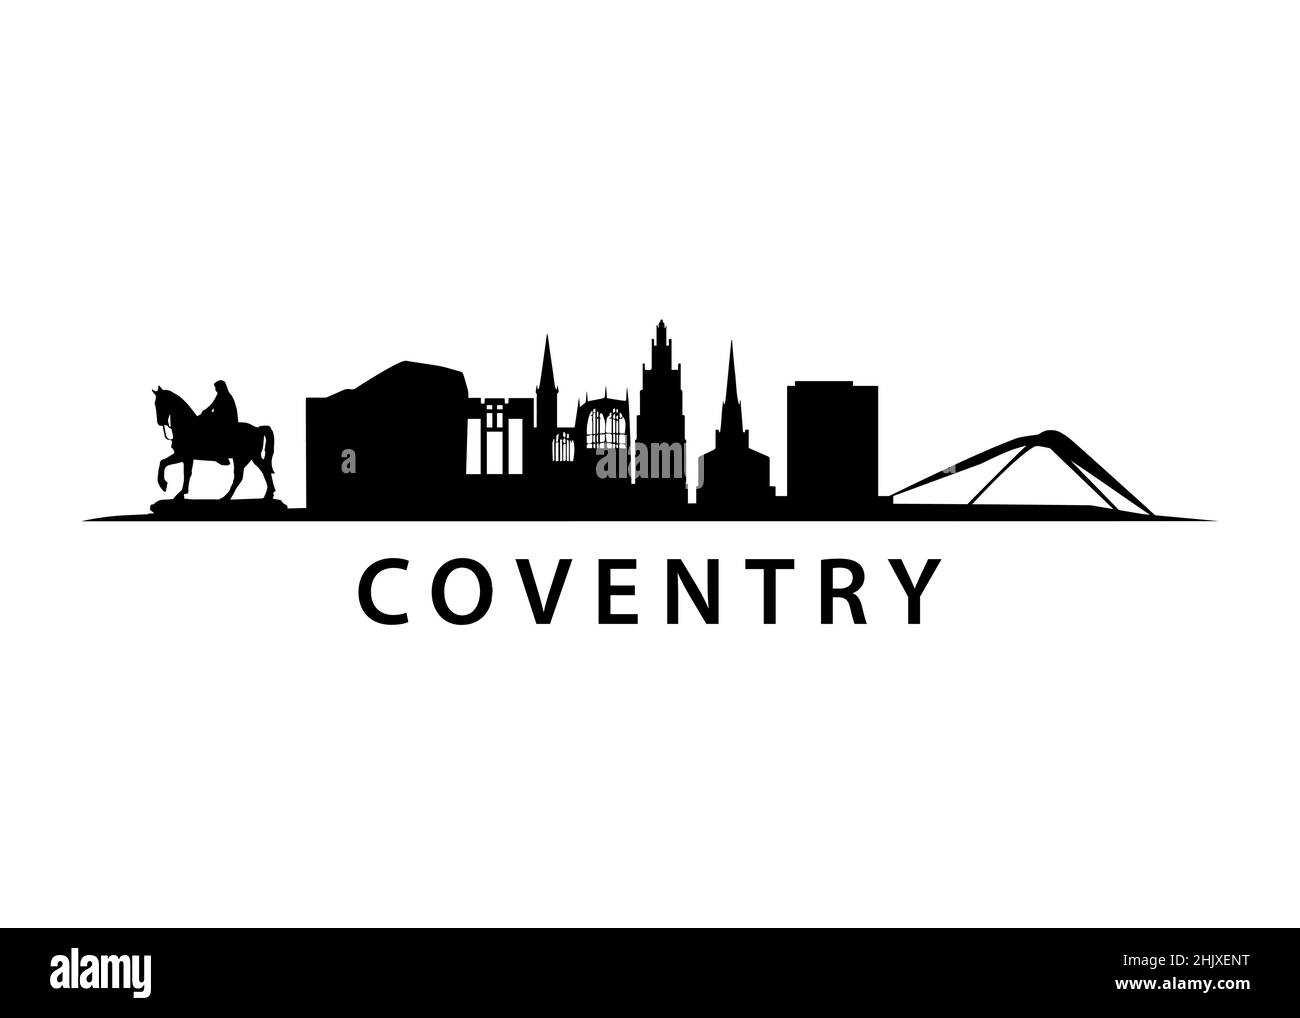 Coventry council Stock Vector Images - Alamy